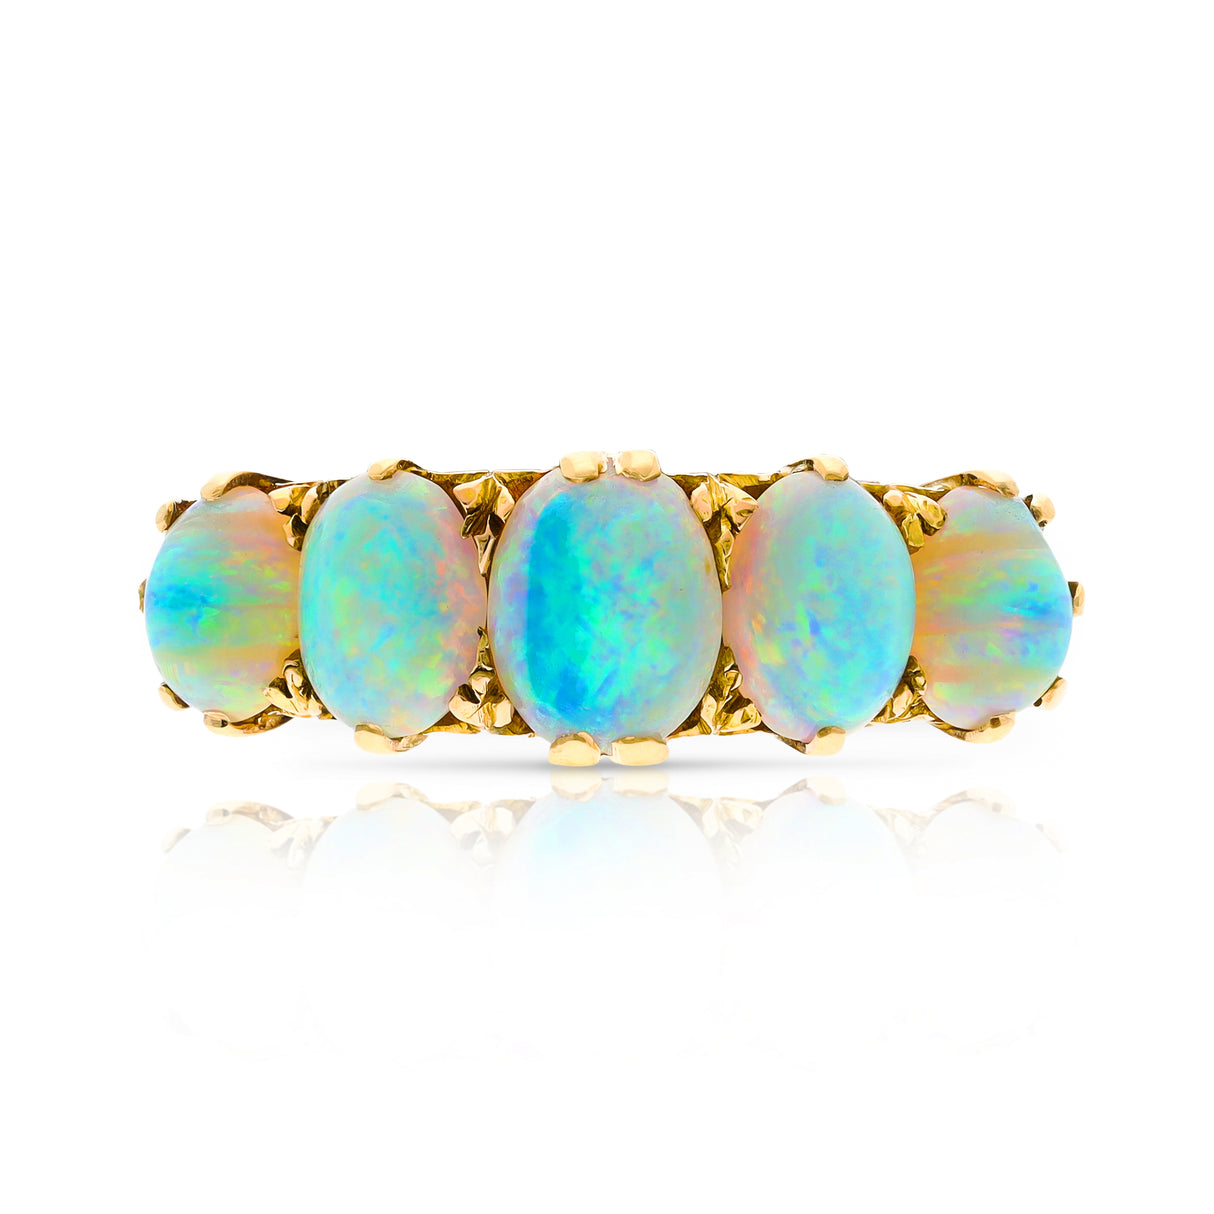 Antique, Edwardian, five-stone opal ring, 18ct yellow gold